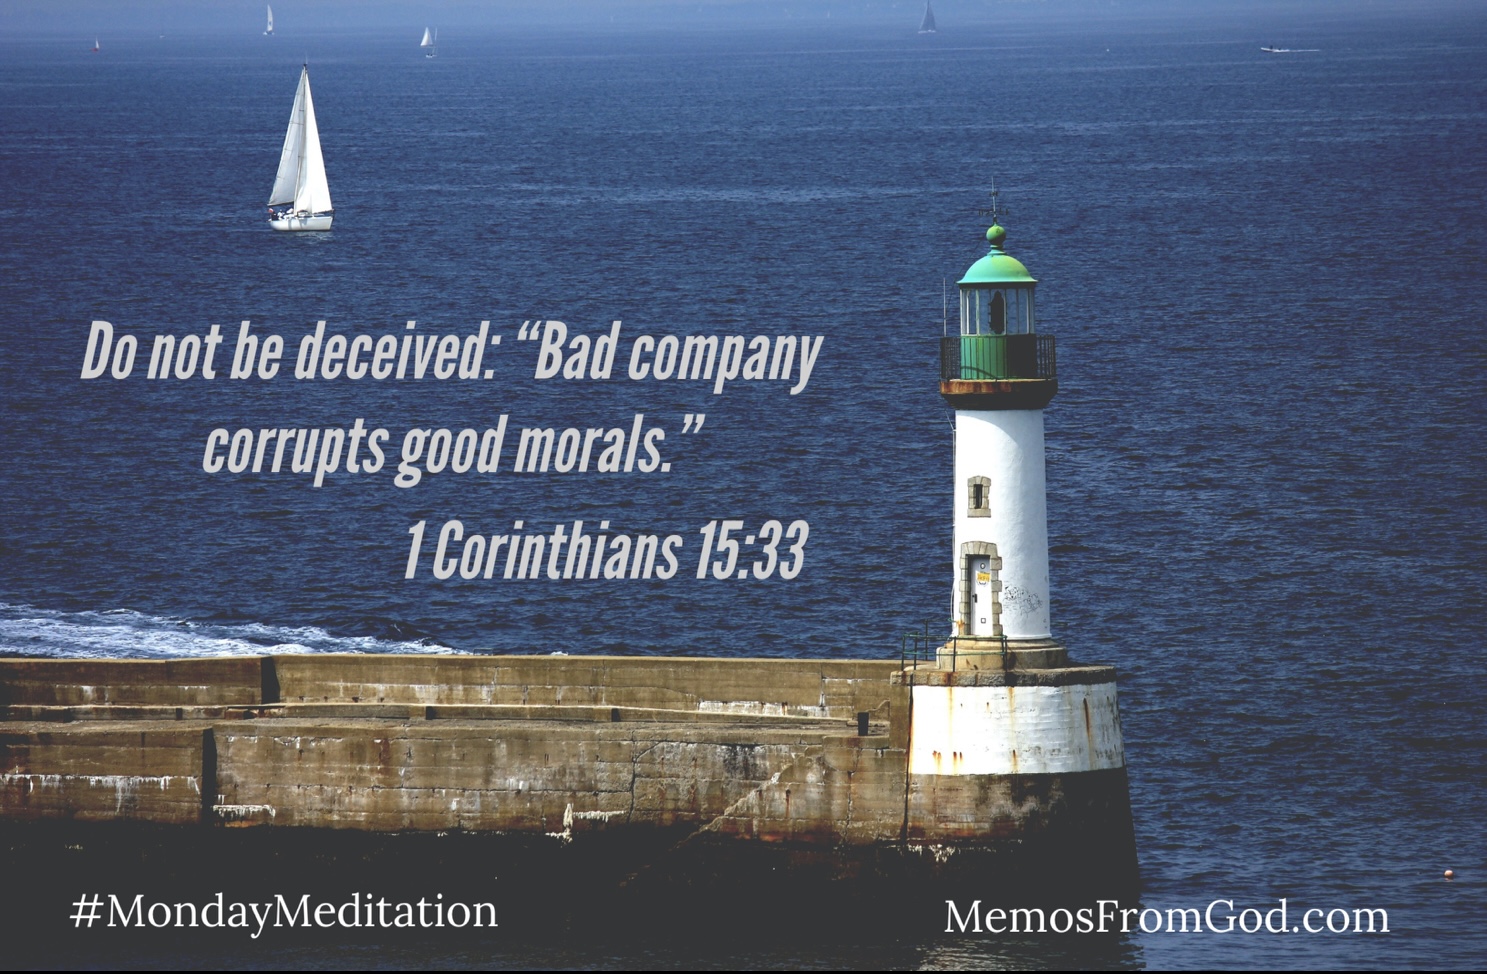 A white lighthouse with a green top at the end of a pier, with sailboats on the deep-blue ocean beyond. Caption: Do not he deceived: "Bad company corrupts good morals. 1 Corinthians 15:33